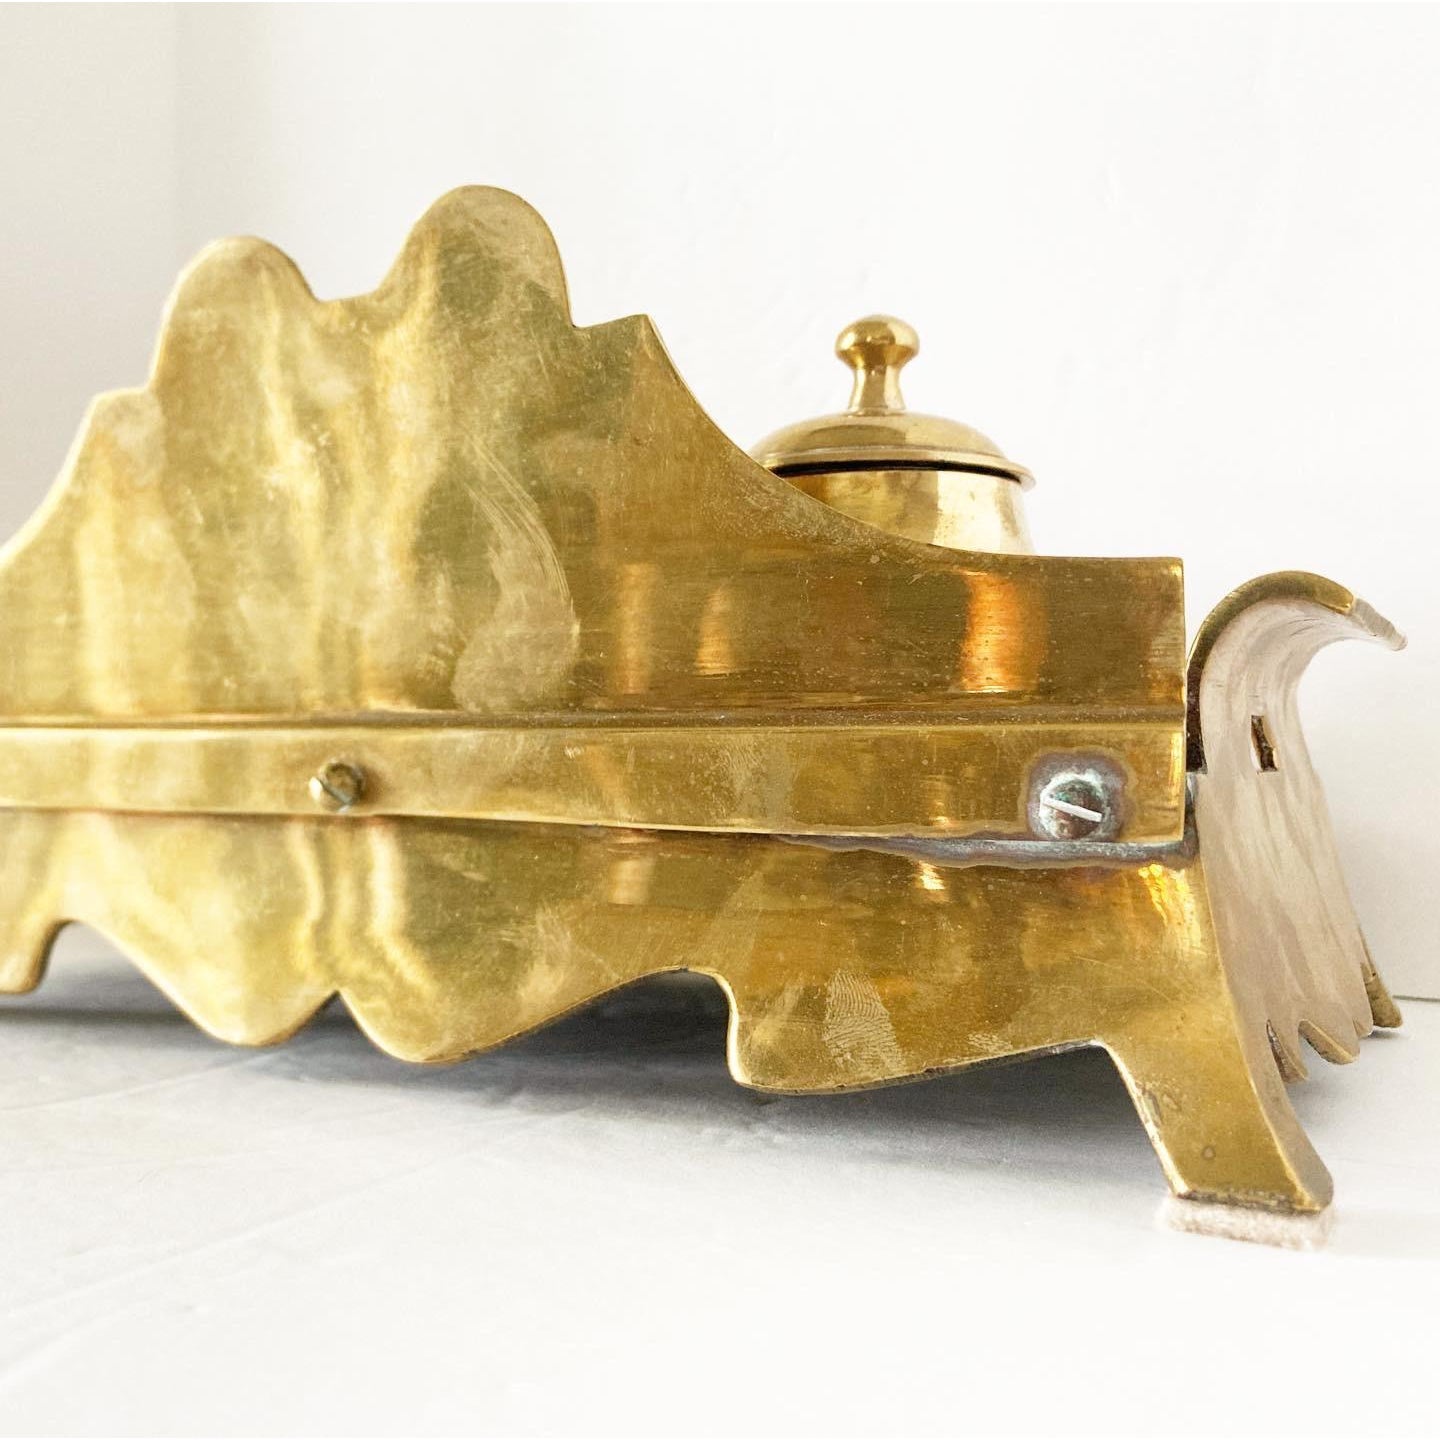 3 Antiqued Brass Inkwell with Removable Glass Bowl